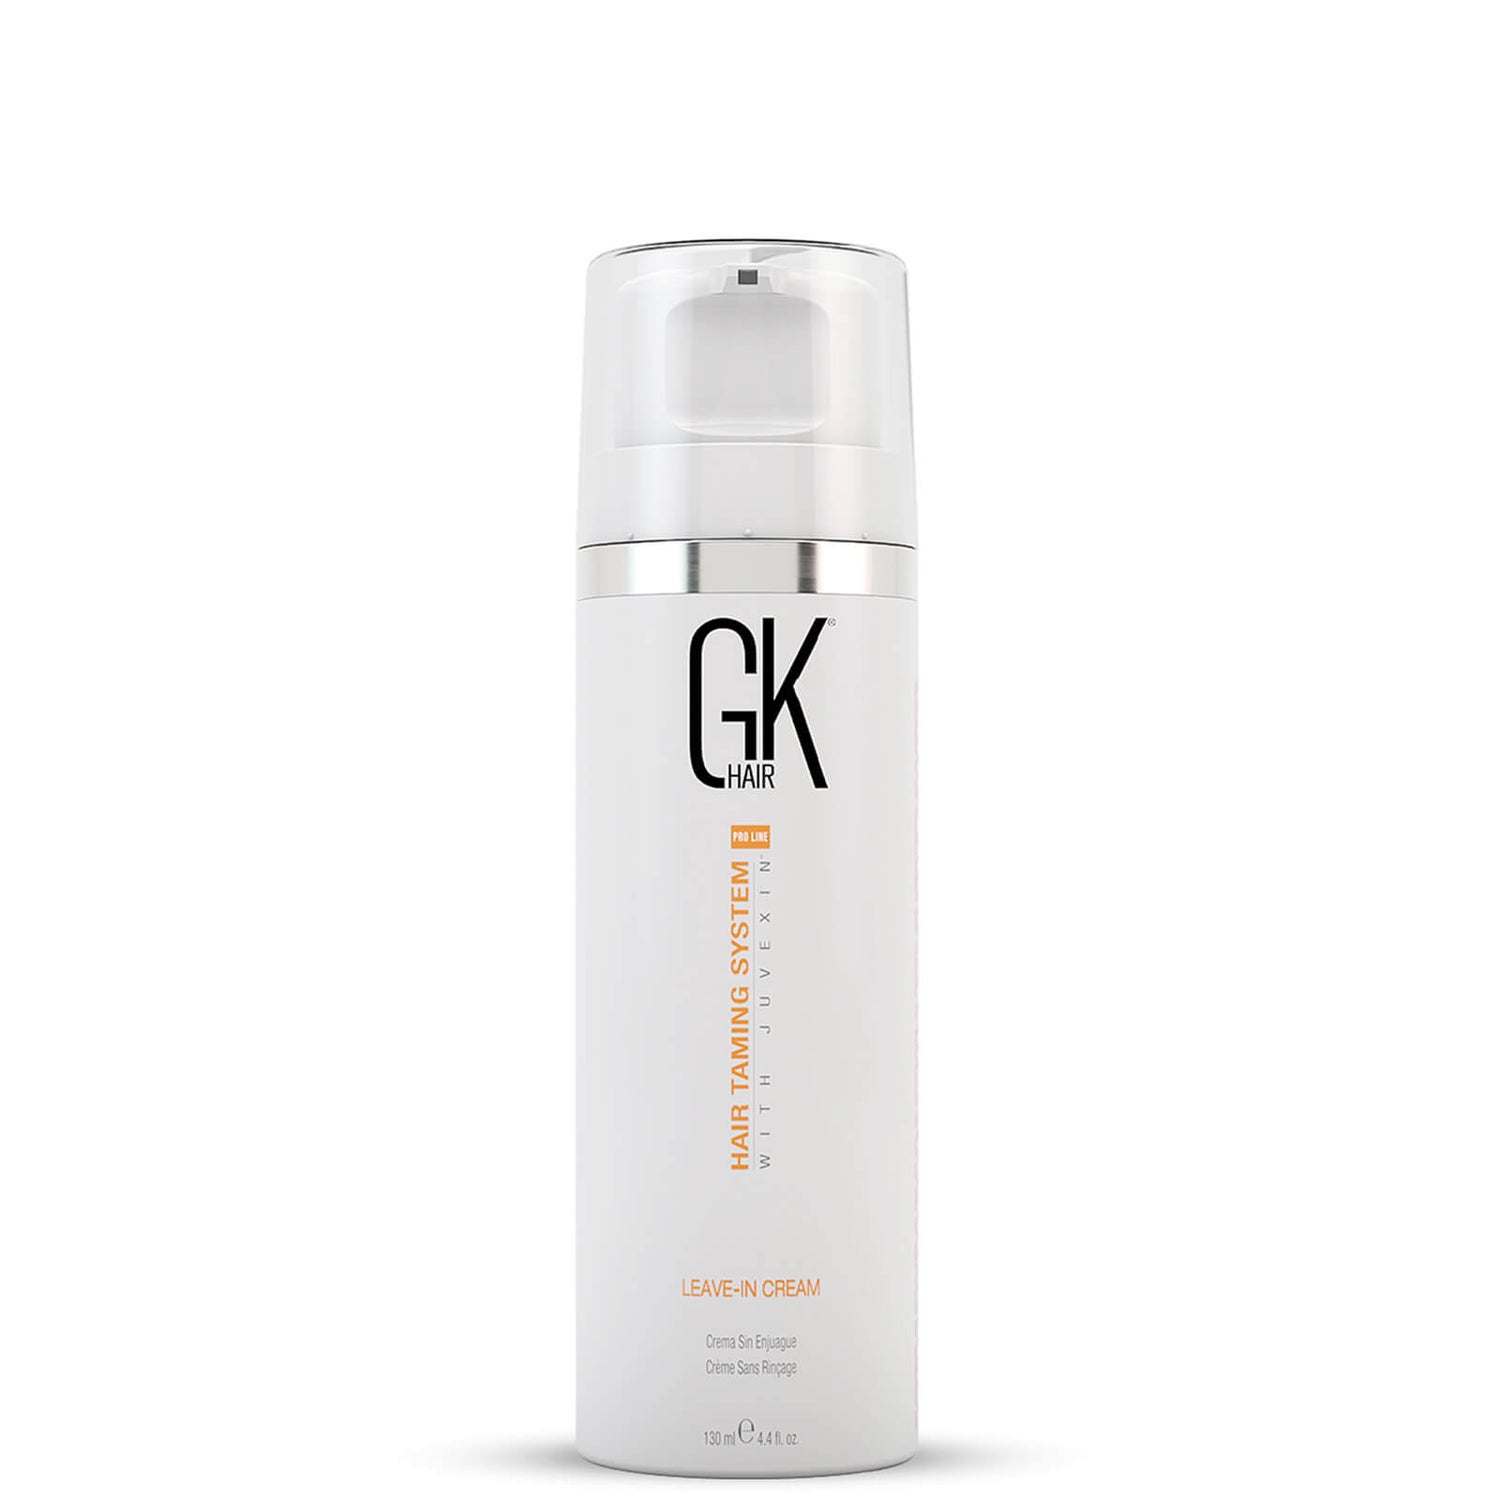 GKhair Leave-in Conditioner Cream 130ml (Worth $28.00)